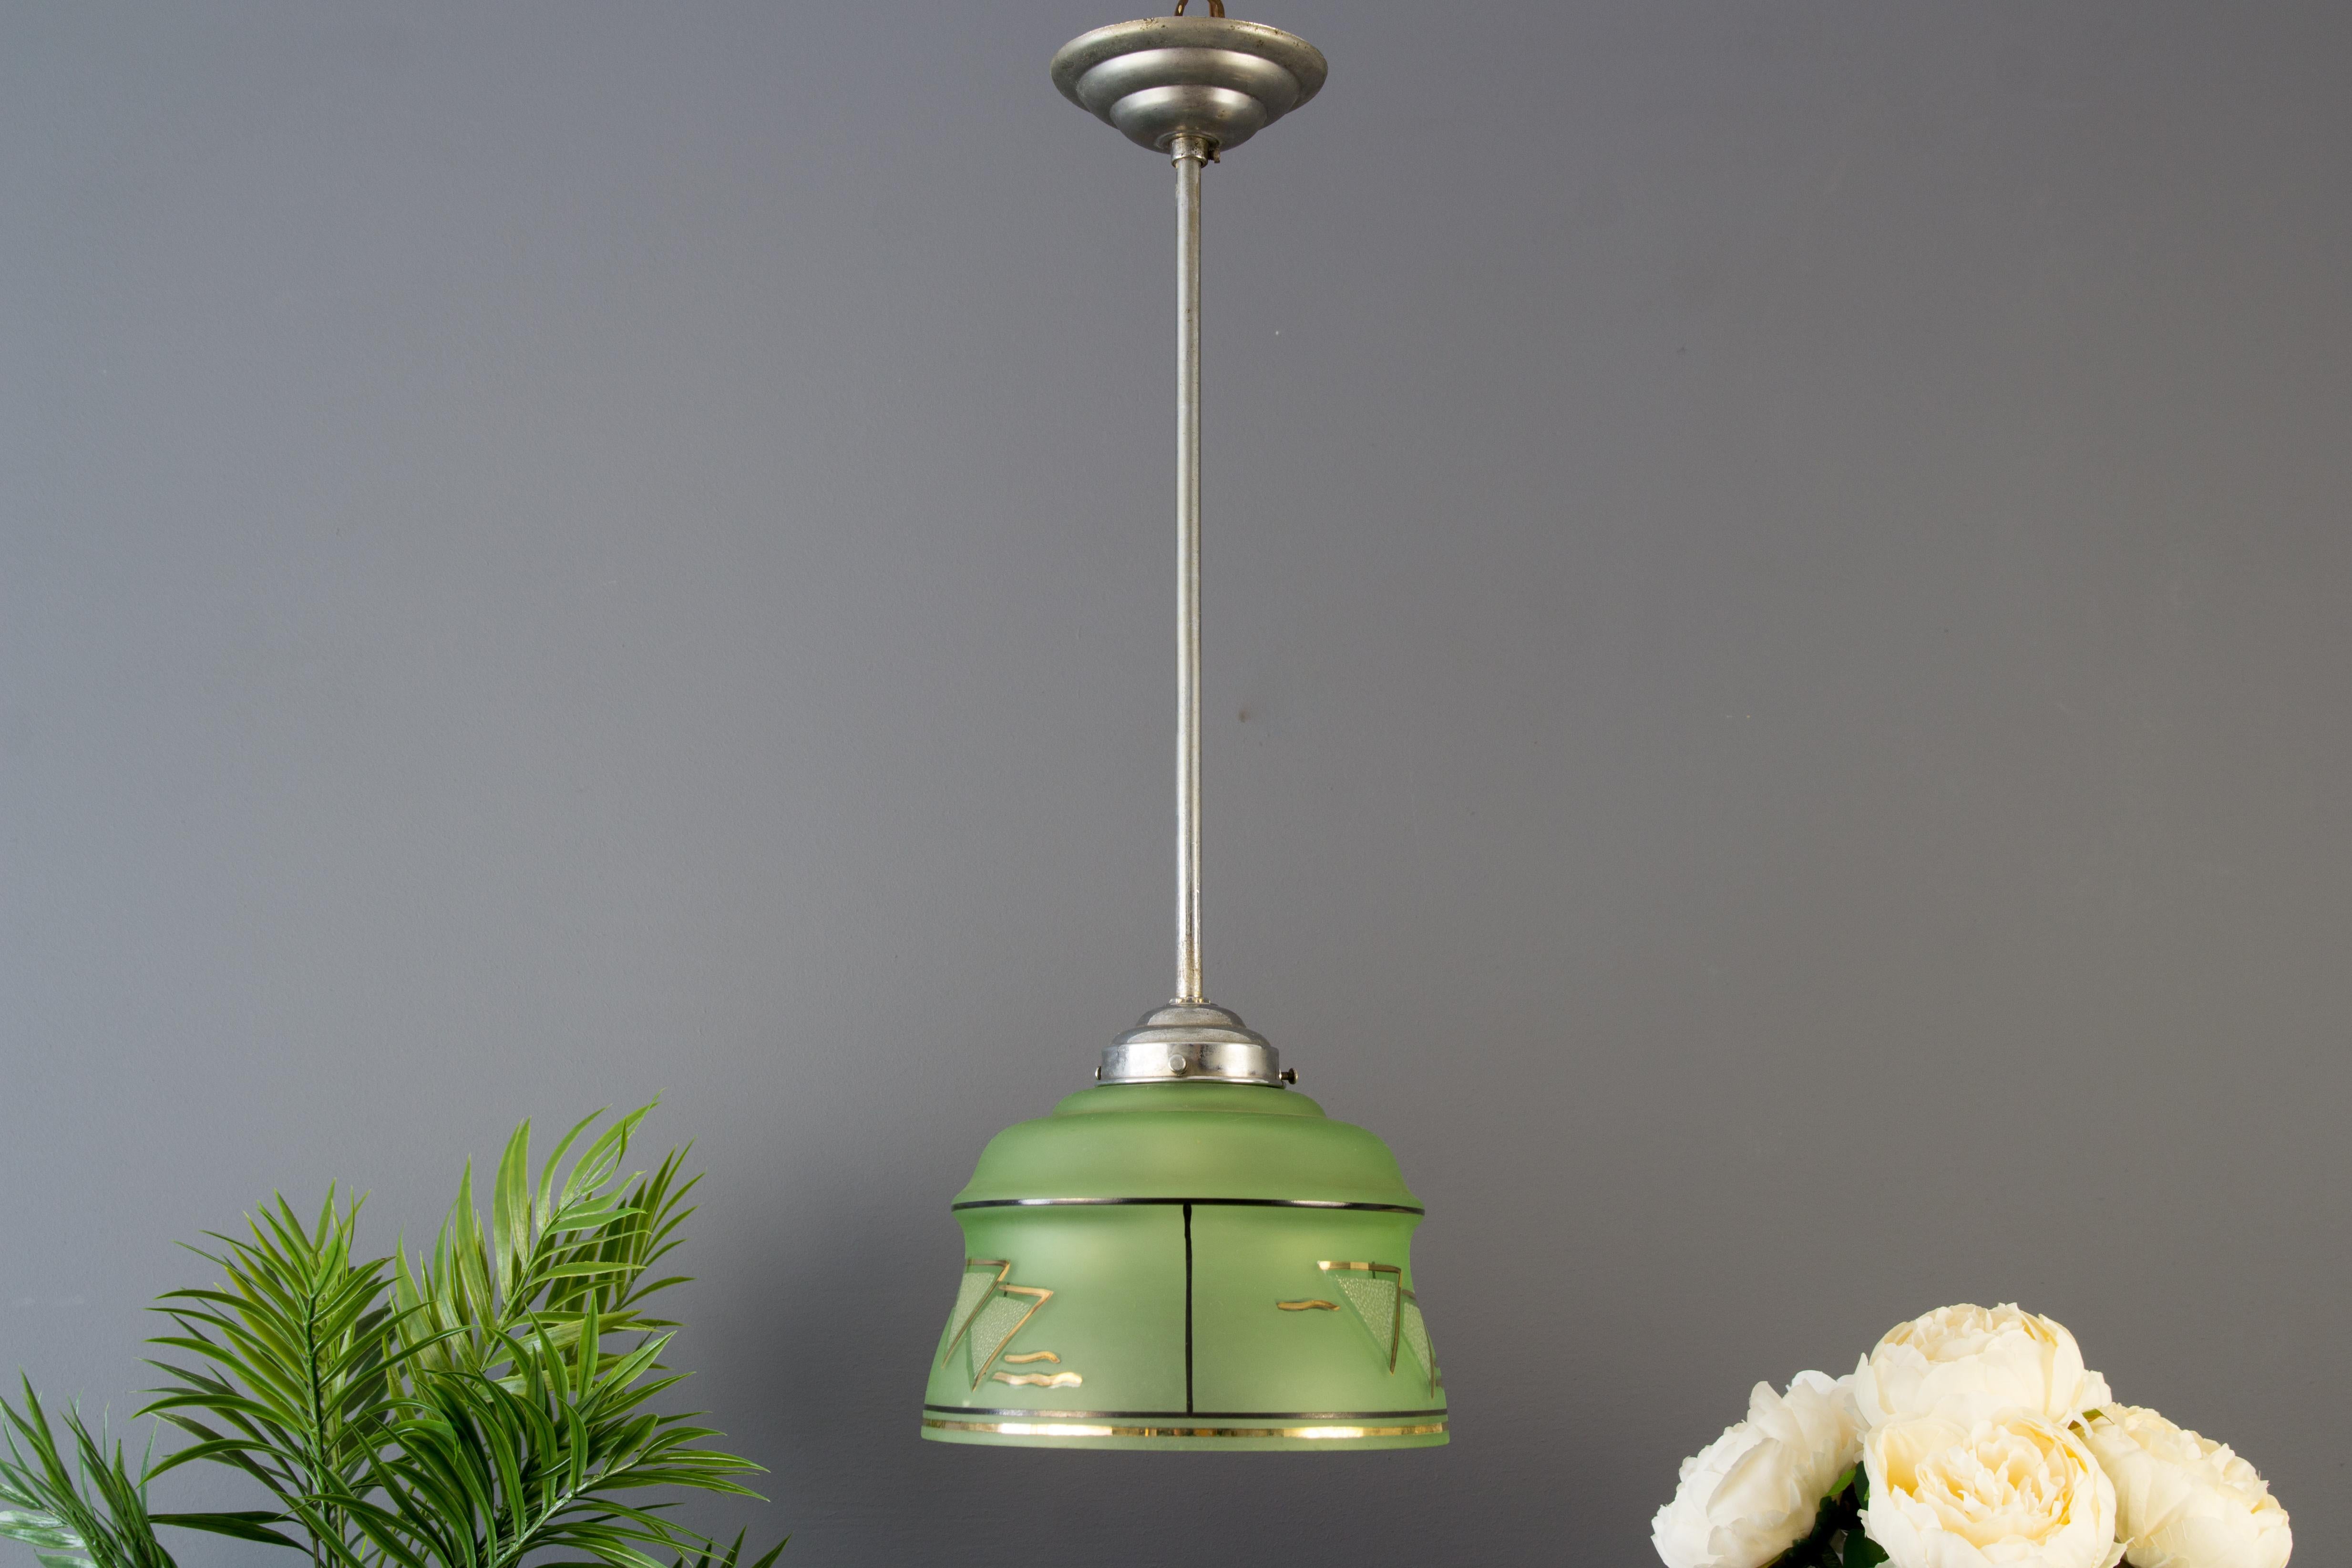 Art Deco brass and green glass pendant, the 1930s
French Art Deco nickeled brass and a green glass pendant from circa the 1930s. One socket for the E 27 (E26) light bulb.
Dimensions: diameter 18 cm / 7.08 in; height 50 cm / 19.68 in.
The light